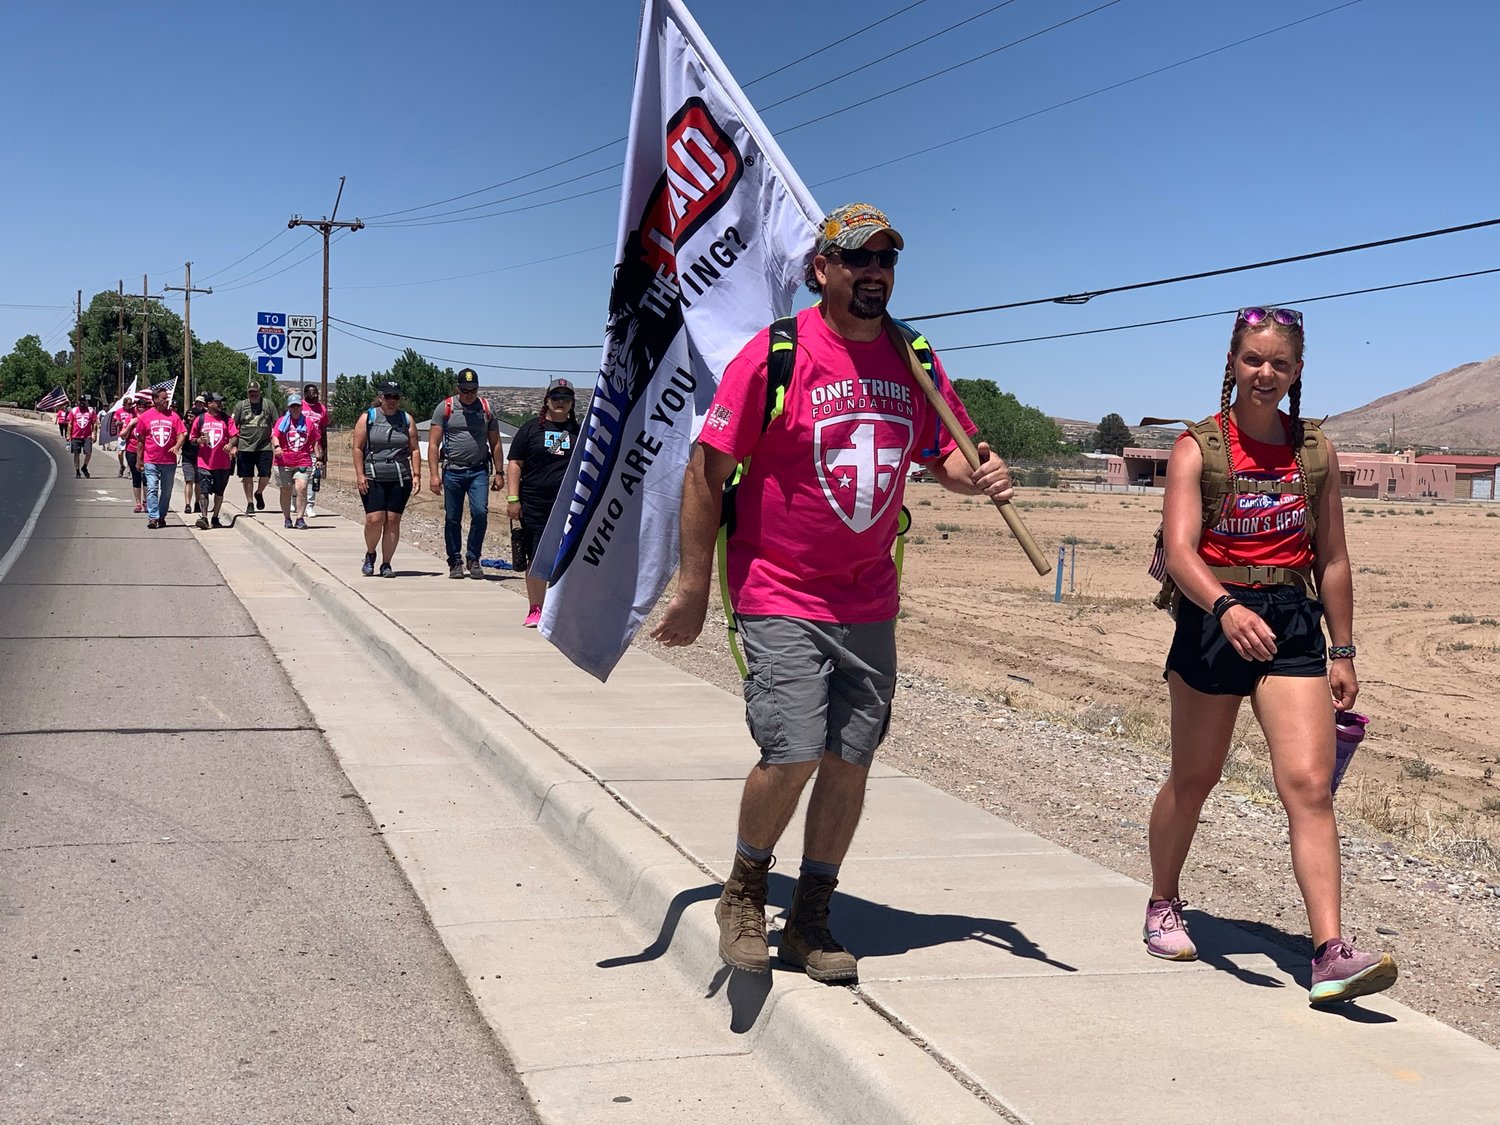 More than 20 individuals from the area do the Tuesday, May 17 Carry the Load segment along Picacho Avenue. The event takes walkers (and bicyclers) across the country with teams from various communities taking turns to honor armed service members and law enforcement officers who have given their lives in service.